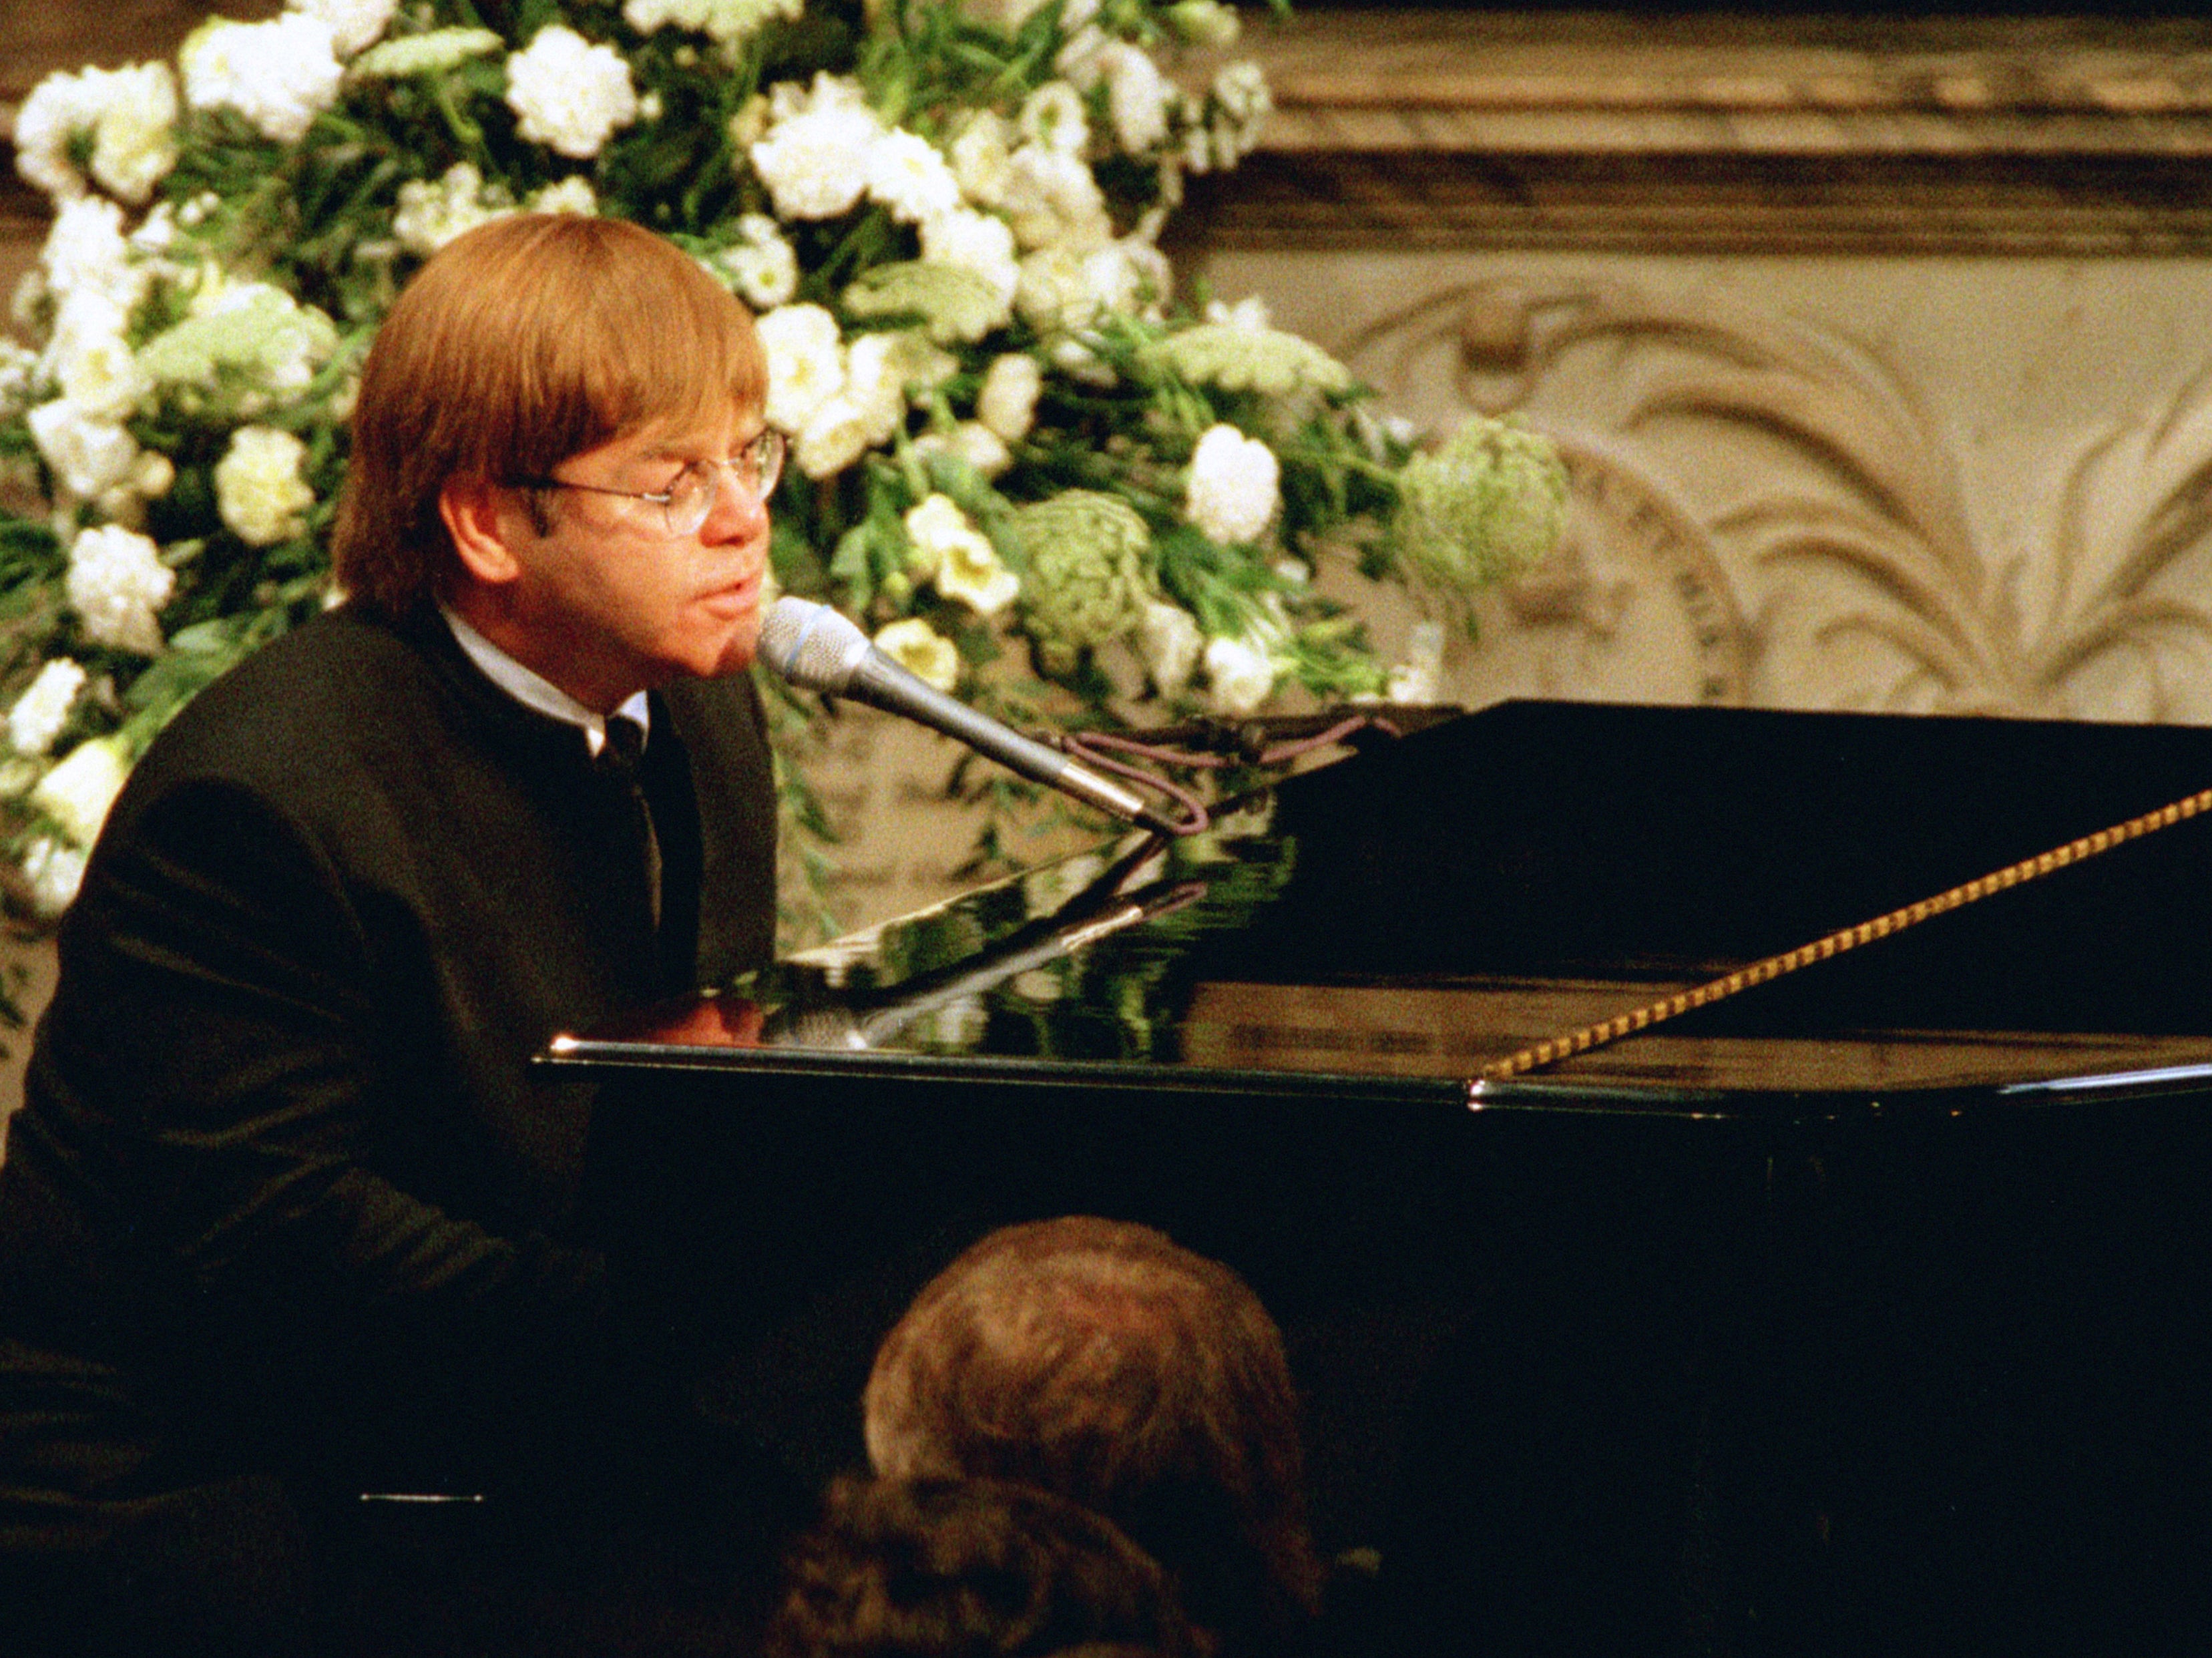 Sir Elton John performed ‘Candle in the Wind’ as a tribute to Diana, Princess of Wales, at her funeral